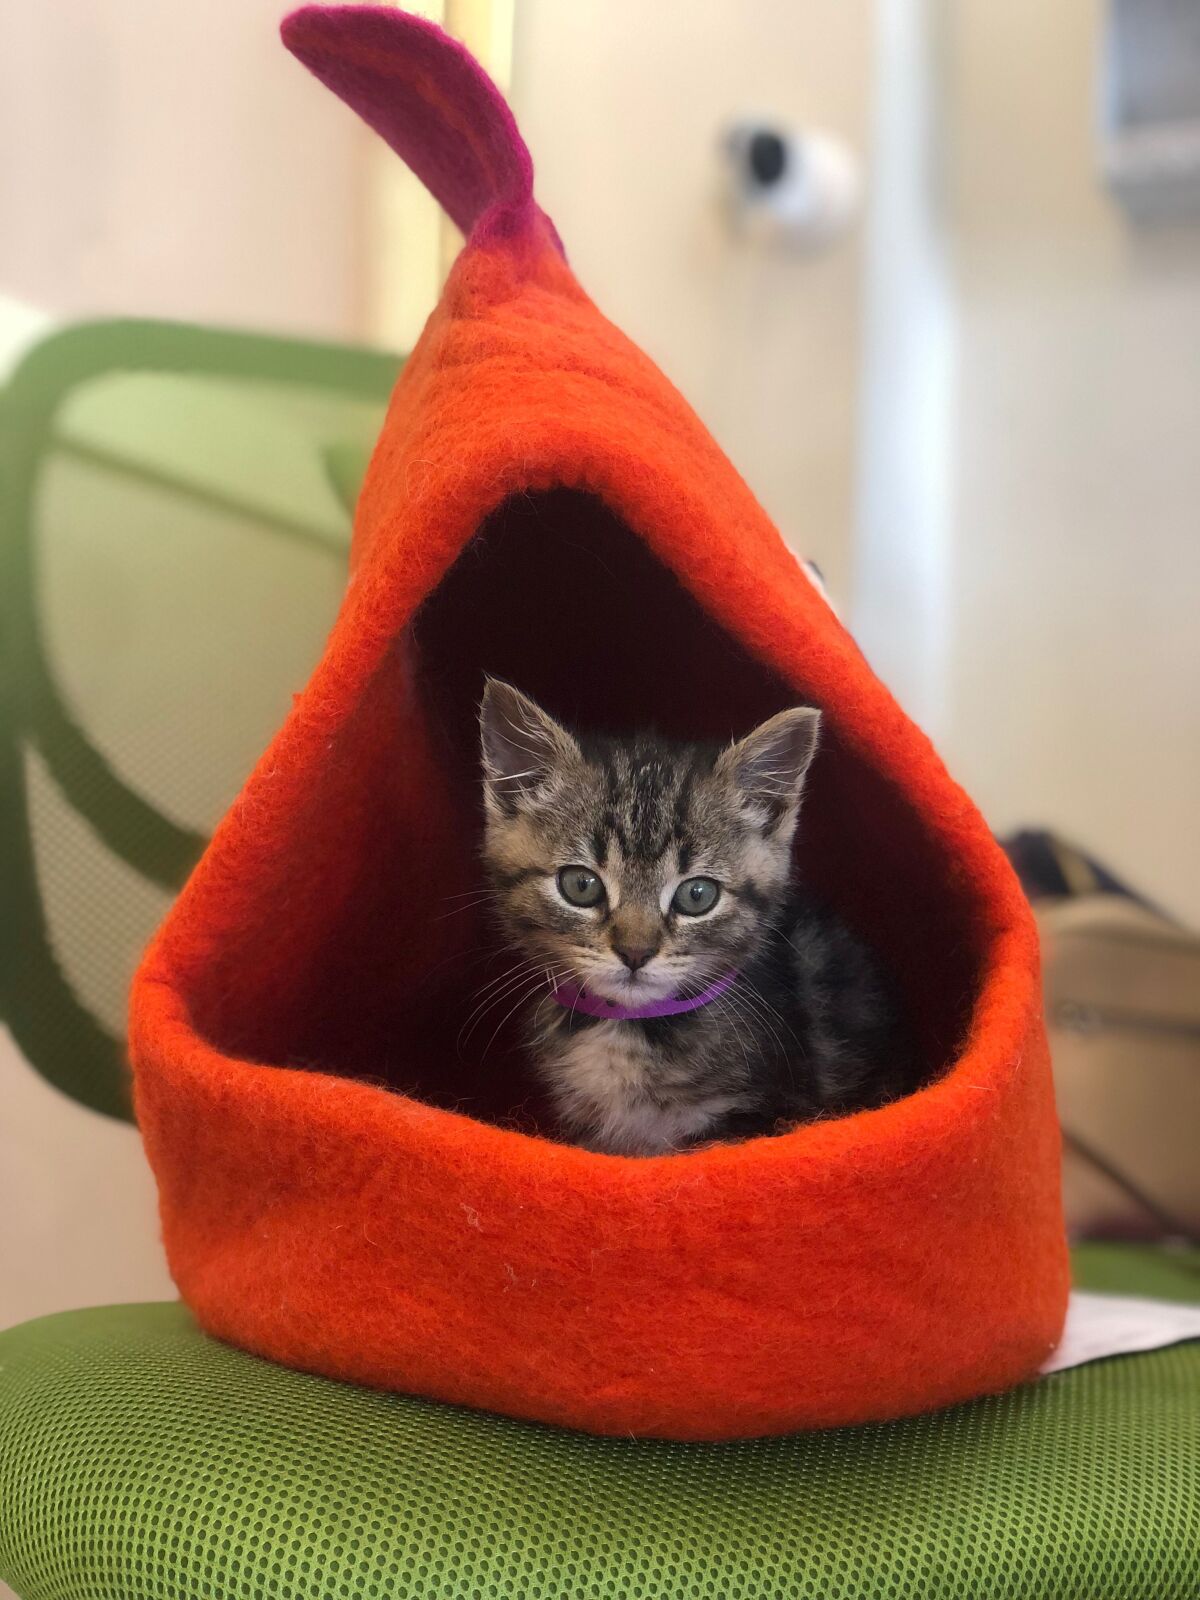 The Cat Lounge in La Jolla has kittens up for adoption.